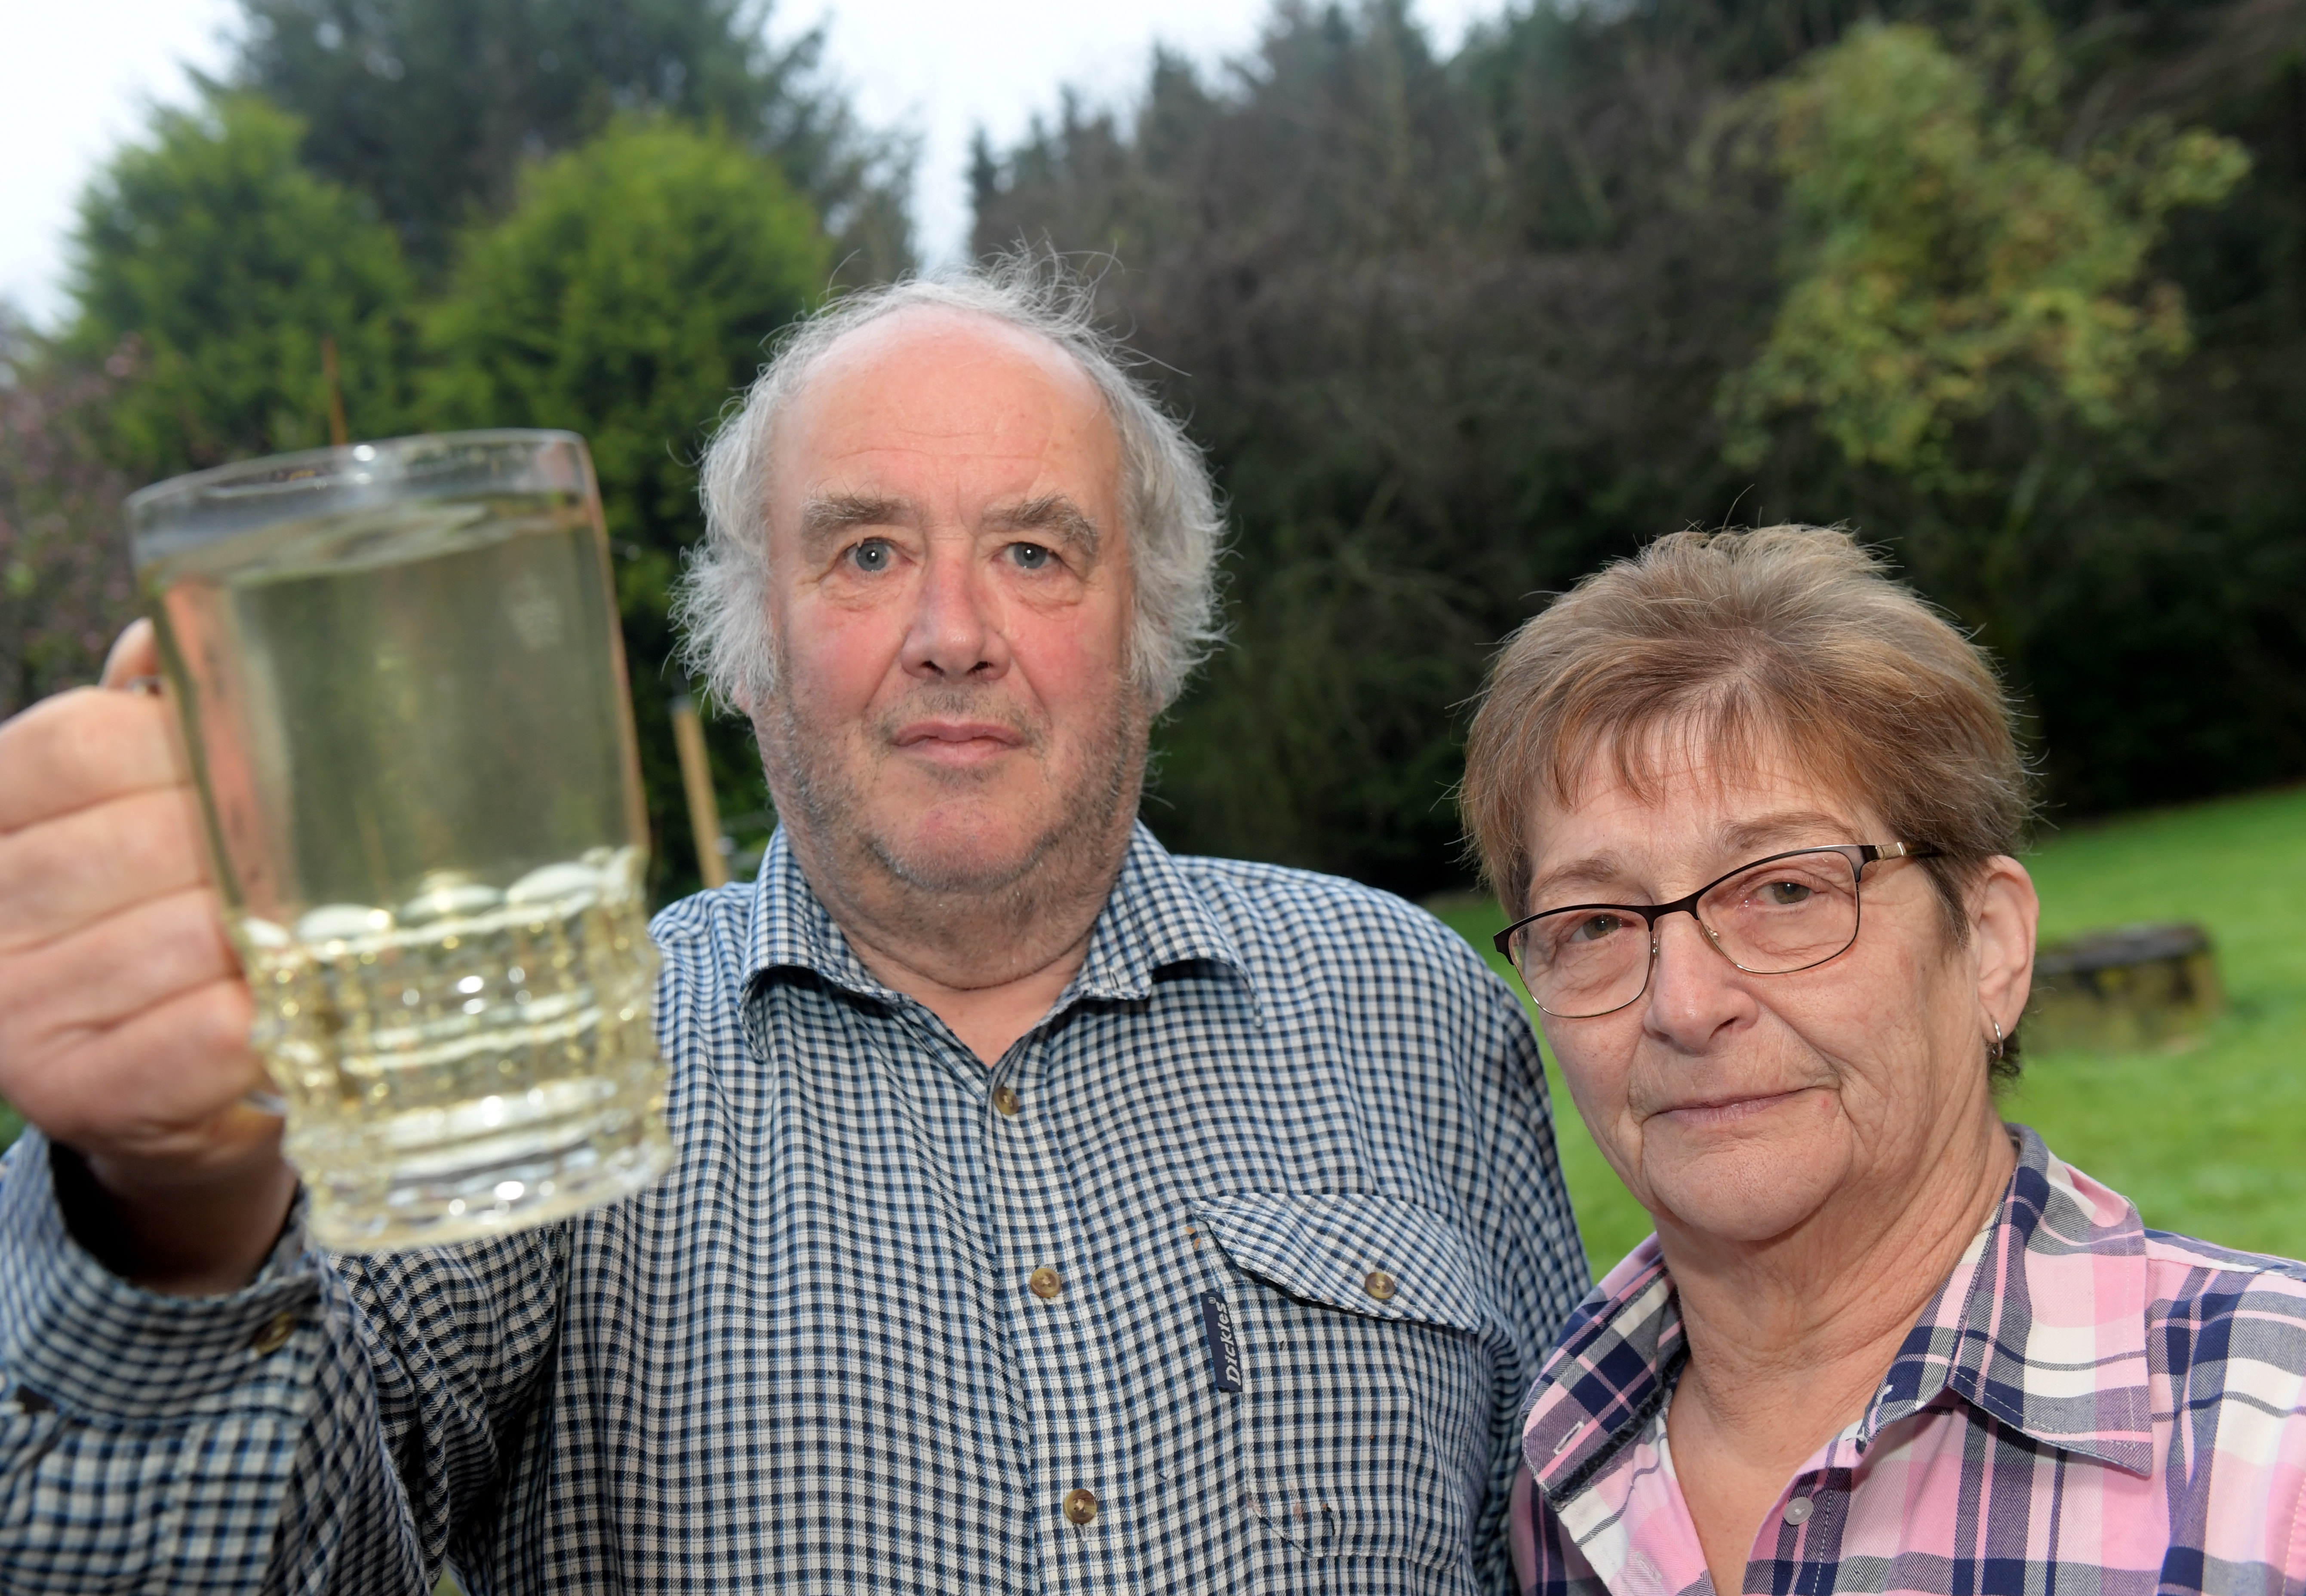 Ron and Kathleen Jamieson's water supply was polluted when people living in the static caravans started digging in the neighbouring field. They feel like they've been ignored by the council.  CR0016797
26/11/19
Picture by KATH FLANNERY